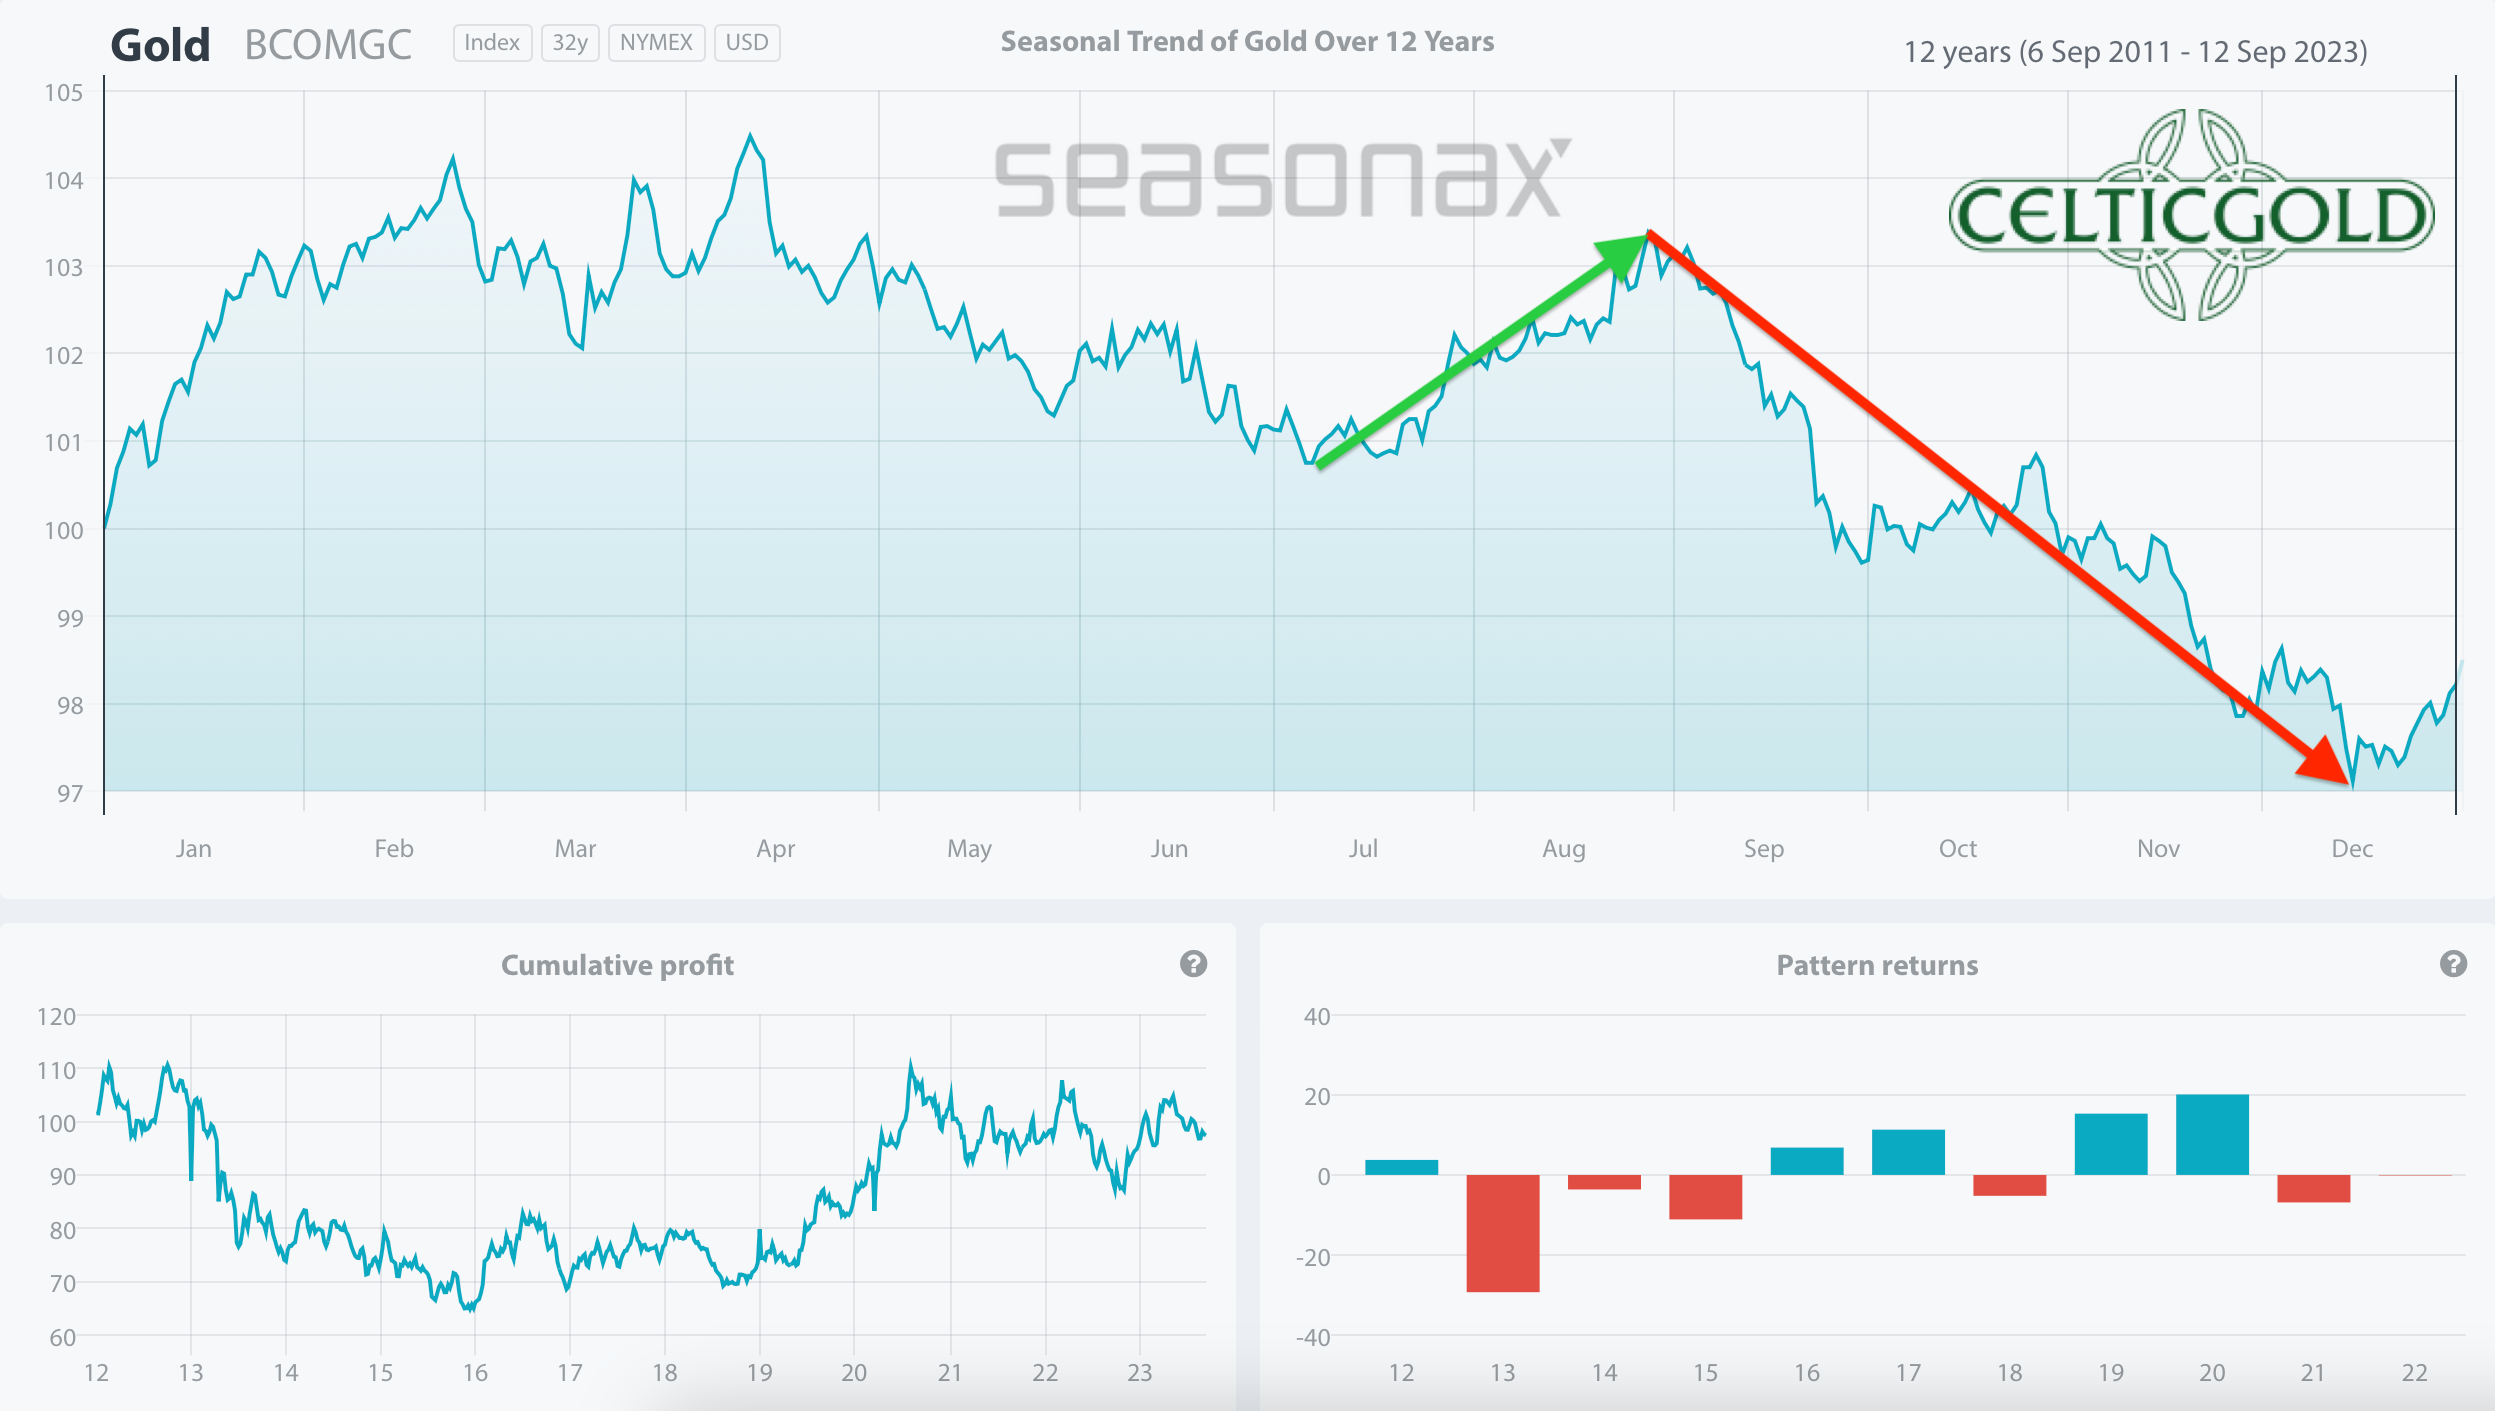 Seasonality For Gold Over The Last 12-Years as of Sept 13th, 2023